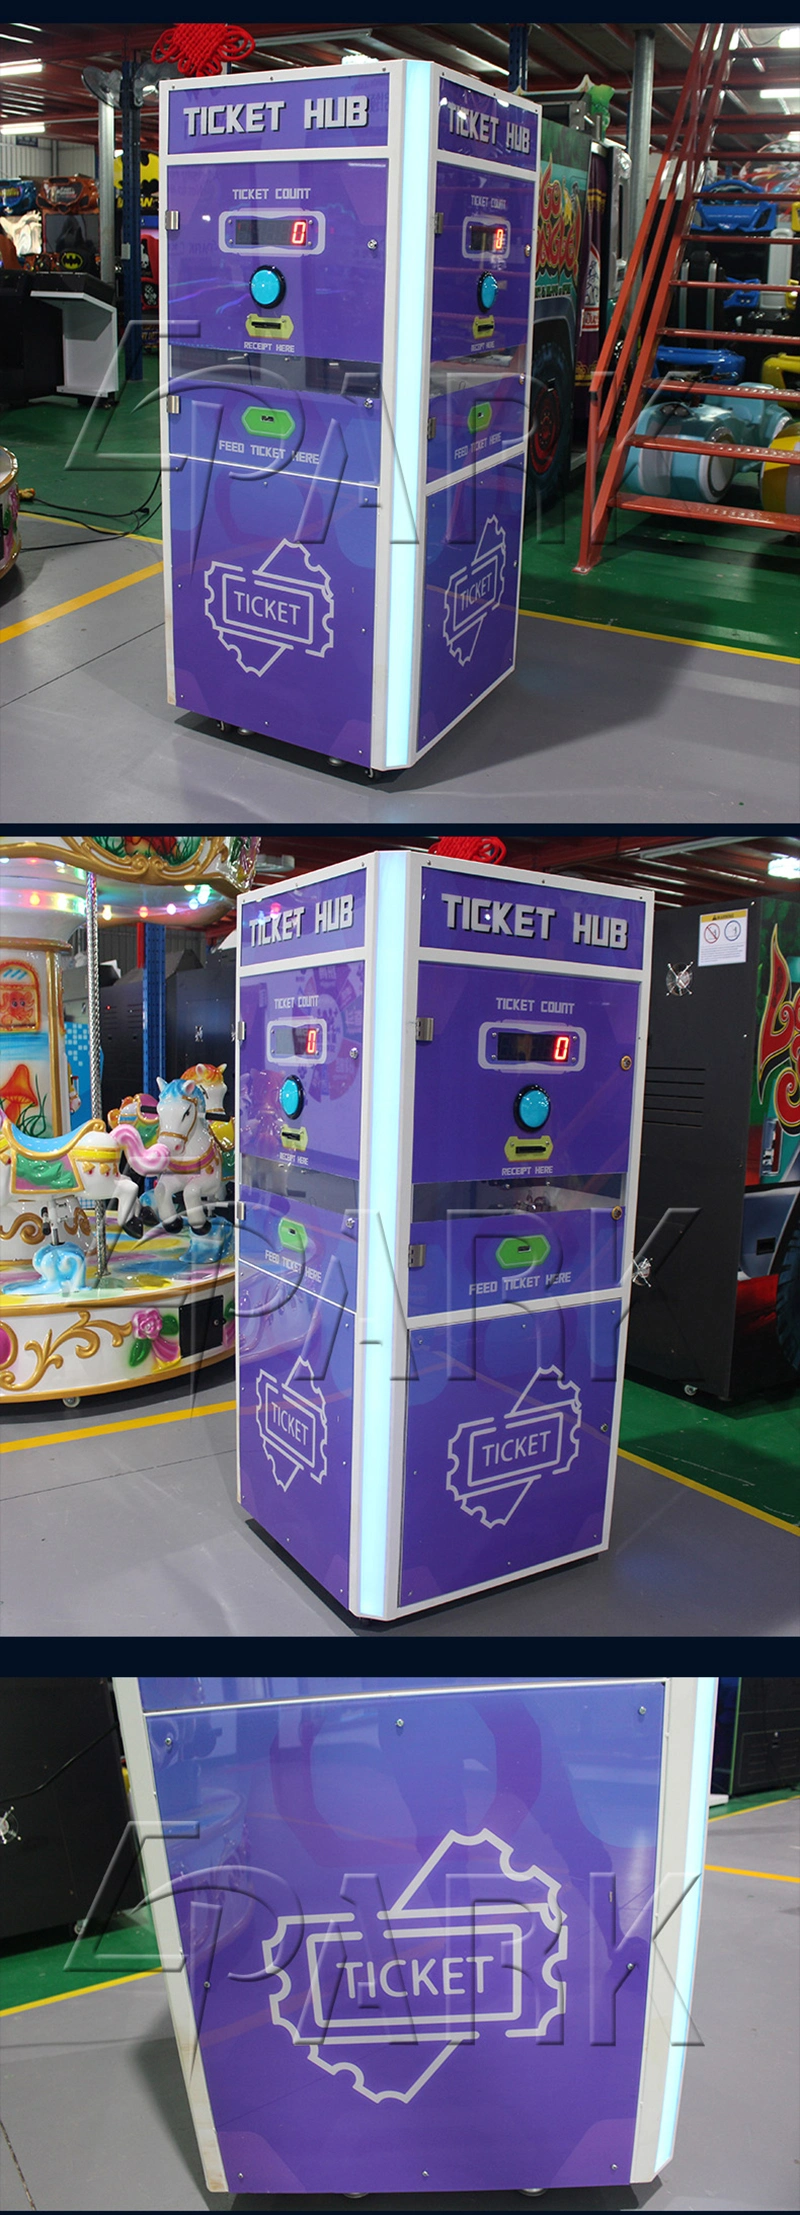 3 in 1 Amusement Park Indoor Game Machine Card System Manage Tickets Smart Device